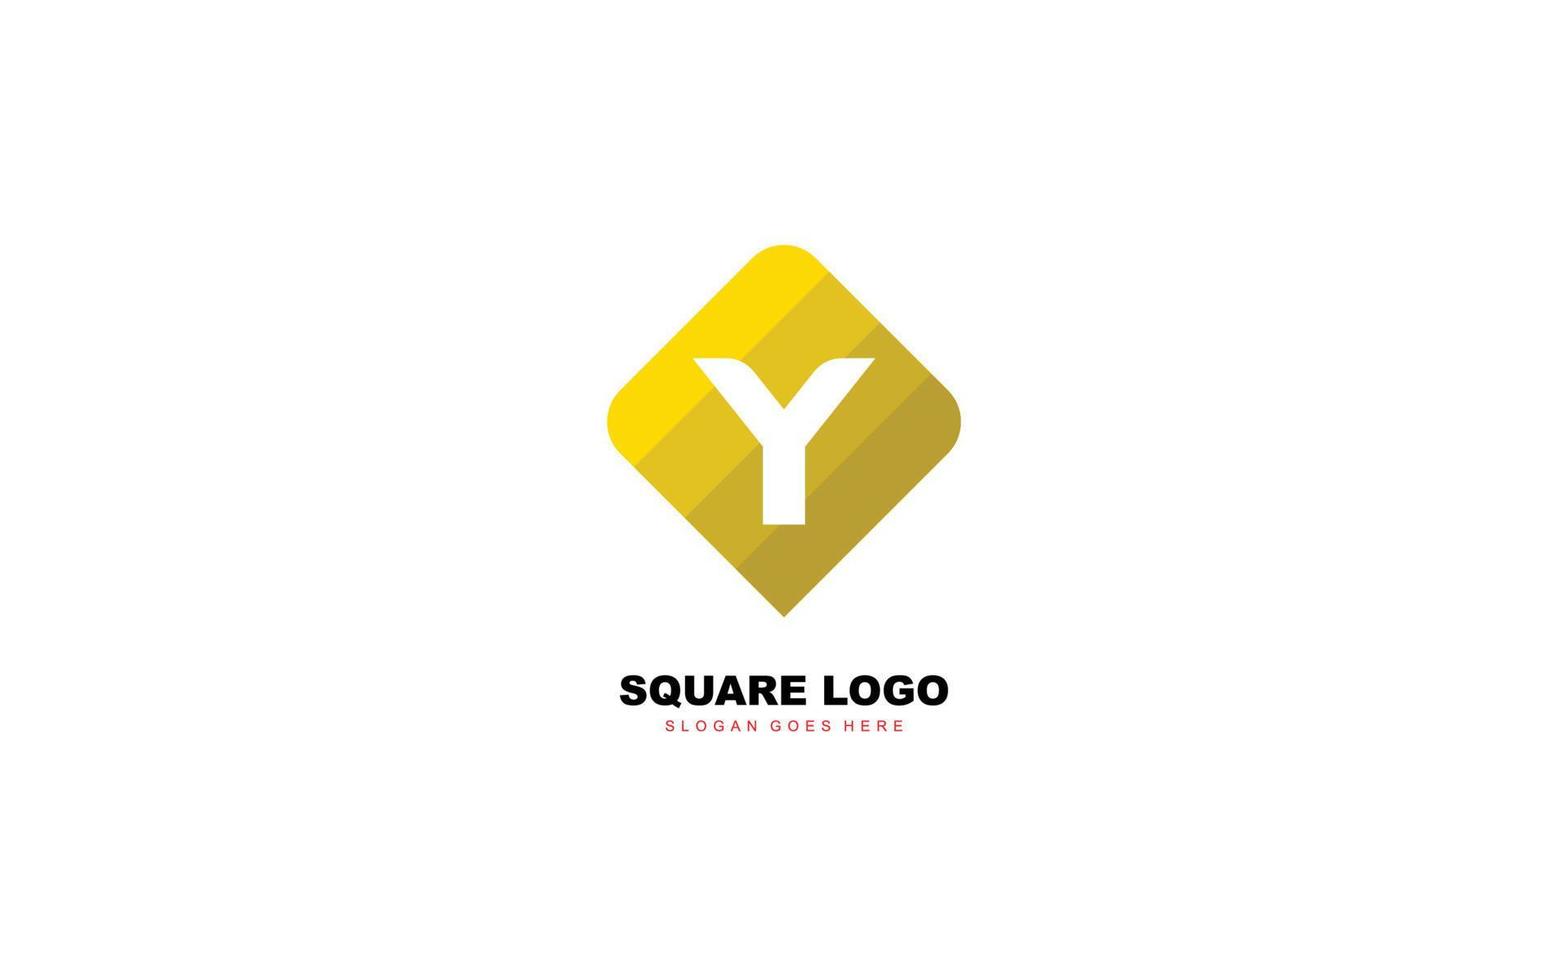 Y logo shape for identity. letter template vector illustration for your brand.